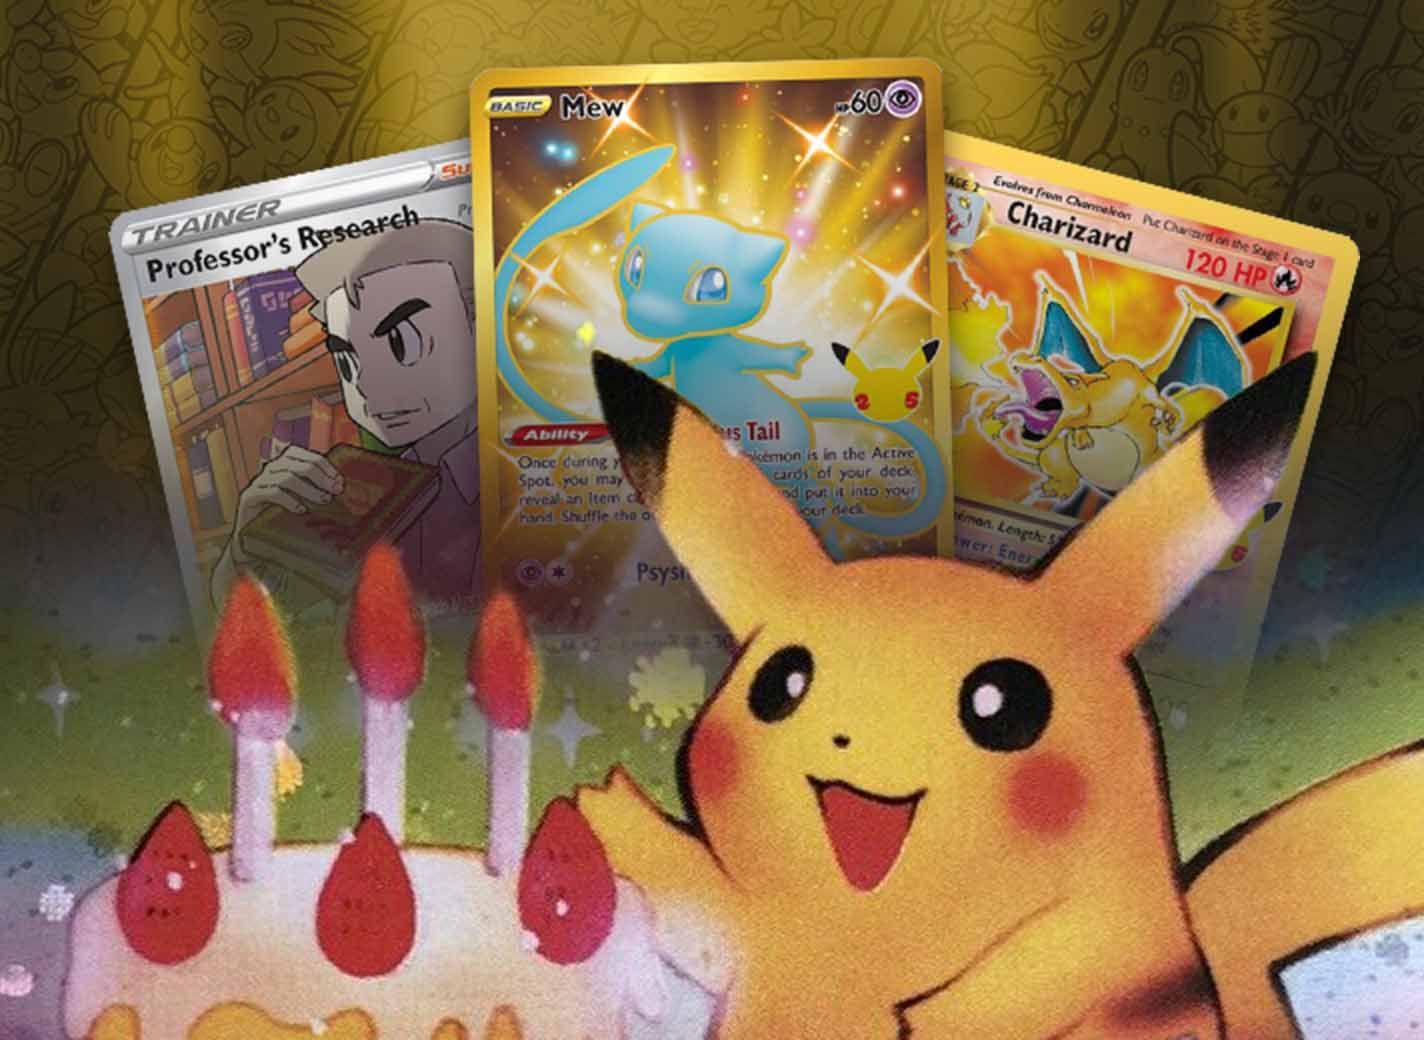 Better look at Gold Mew from celebrations! 25/25 : r/PokemonTCG